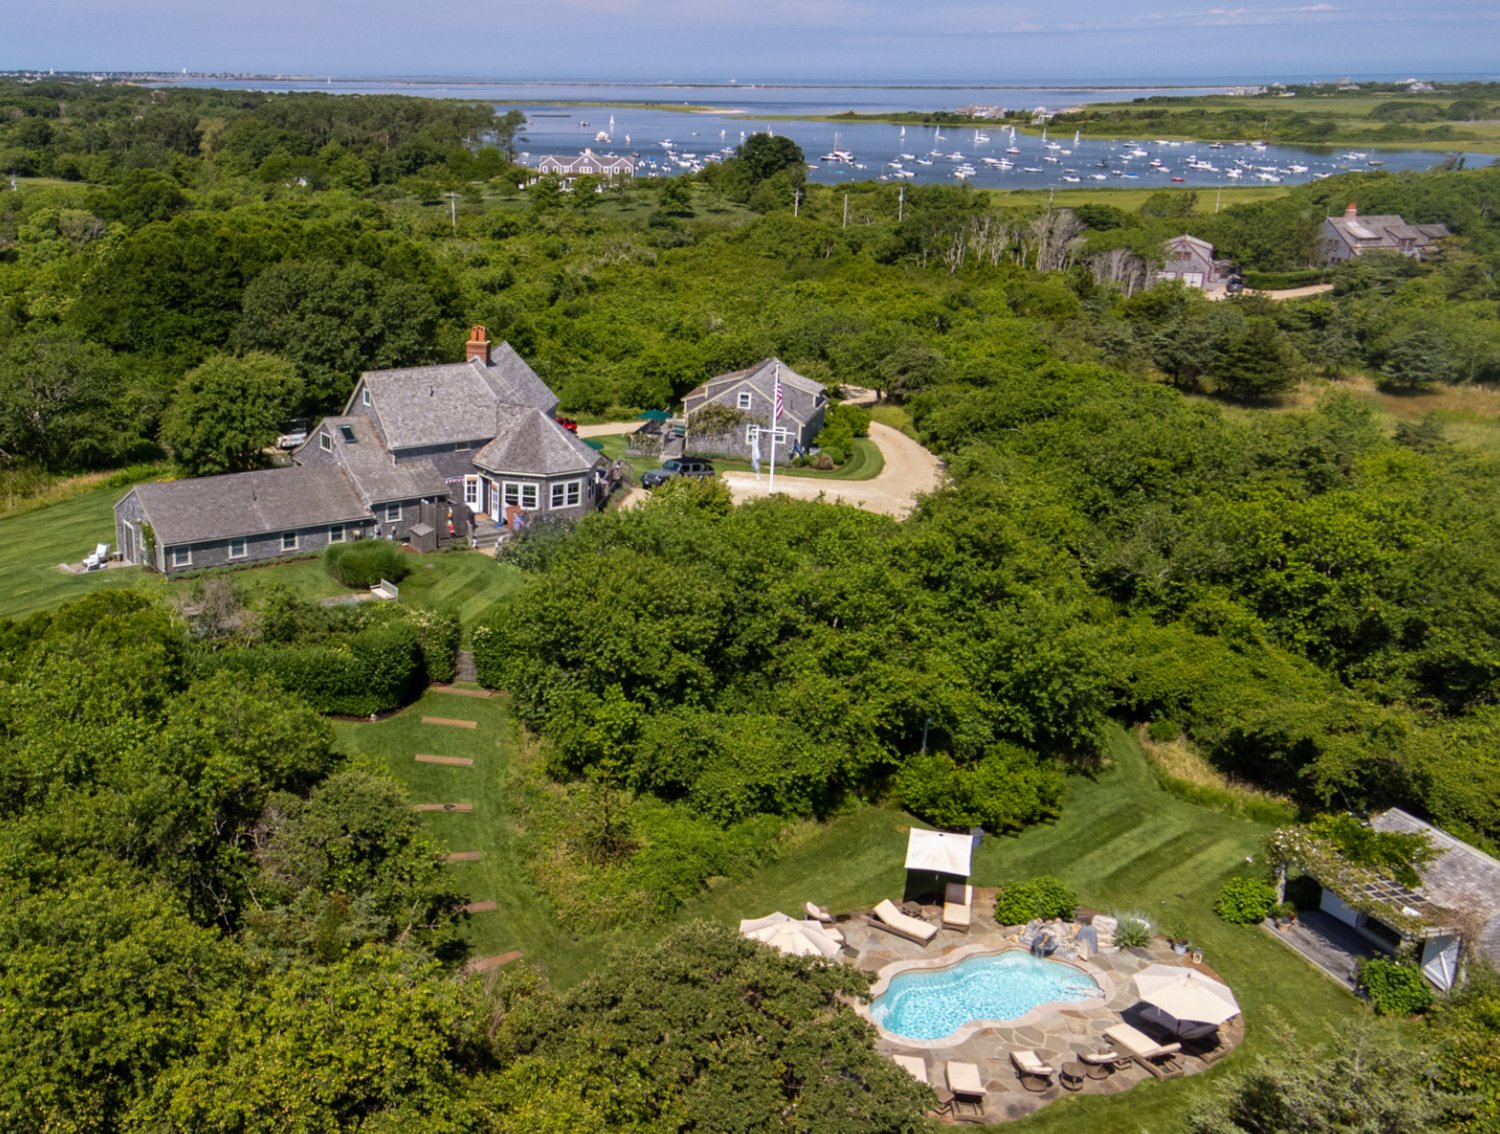 This rare hilltop family compound, located in the highly-desirable Wauwinet area, has seven bedrooms, seven bathrooms and views of Nantucket Sound and beyond to Coatue from the main home and guest cottage.